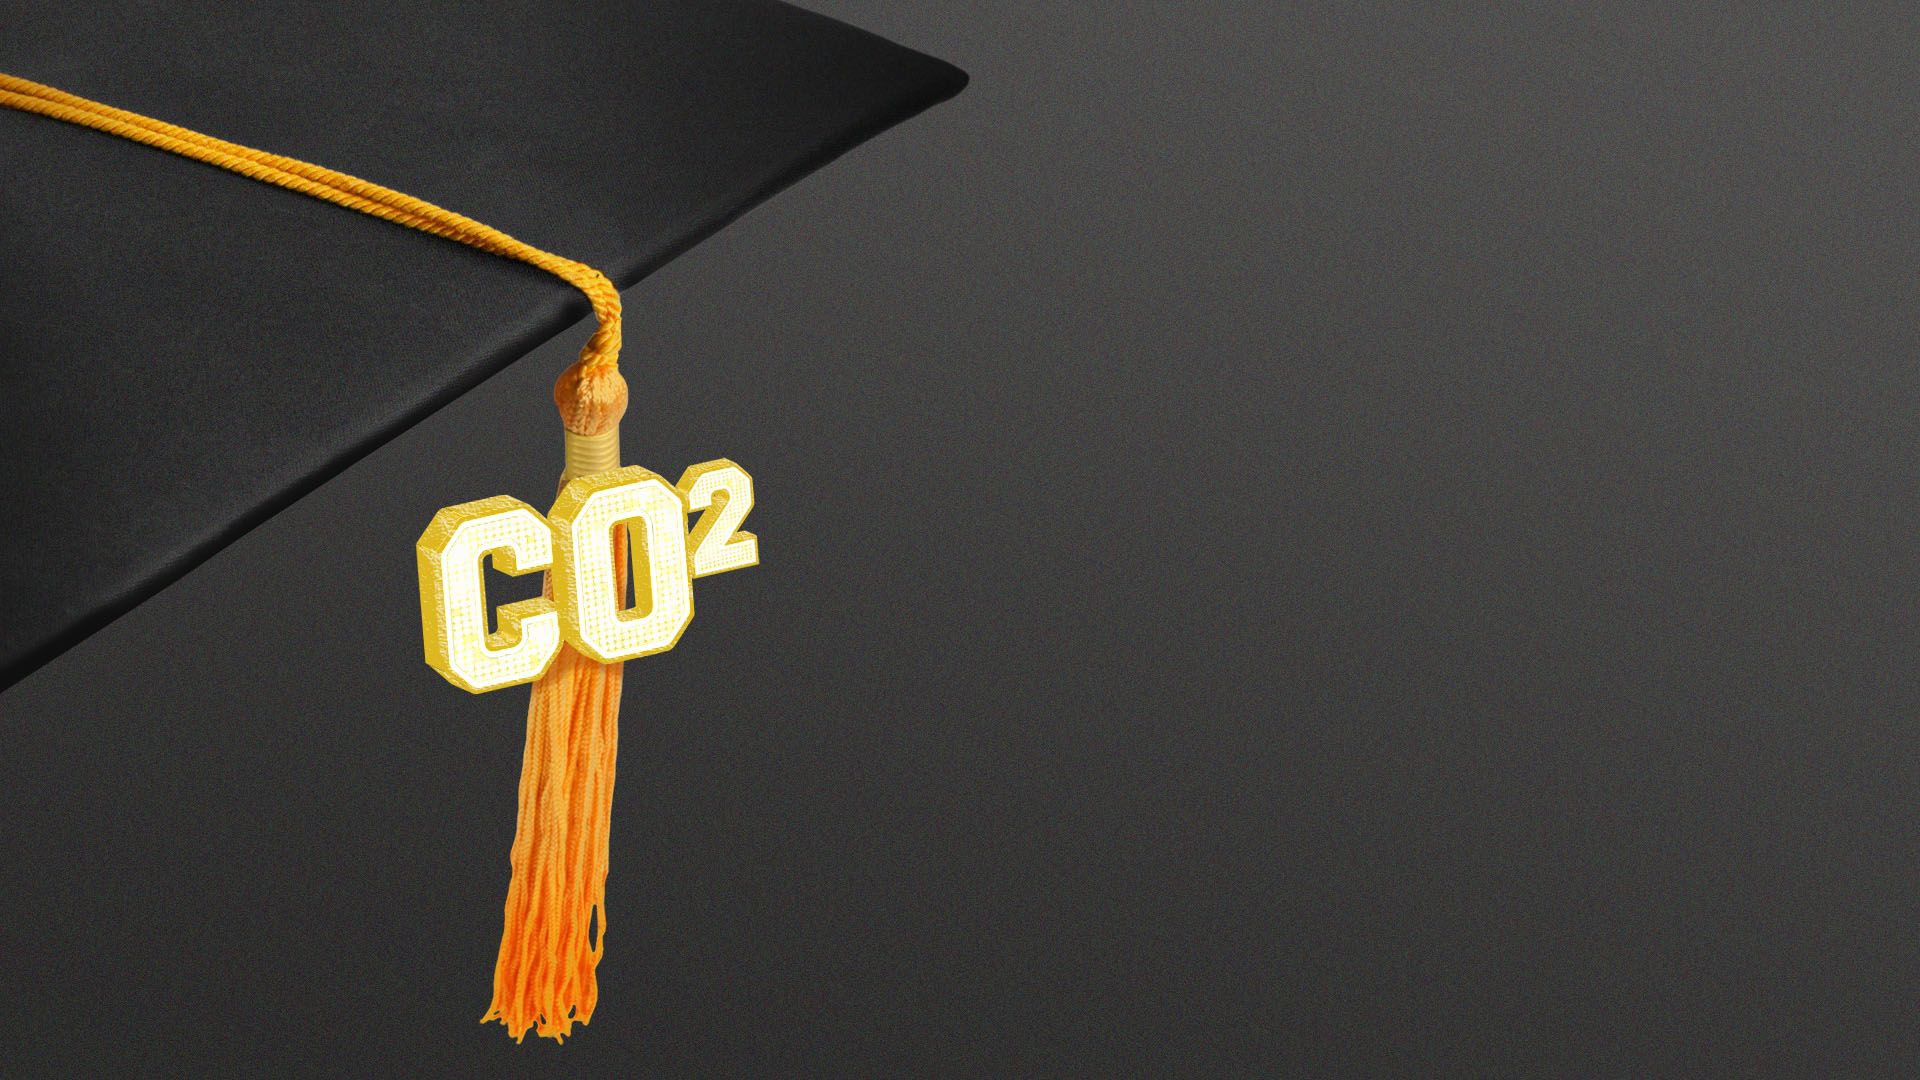 Illustration of a graduation cap tassel with CO2 on it